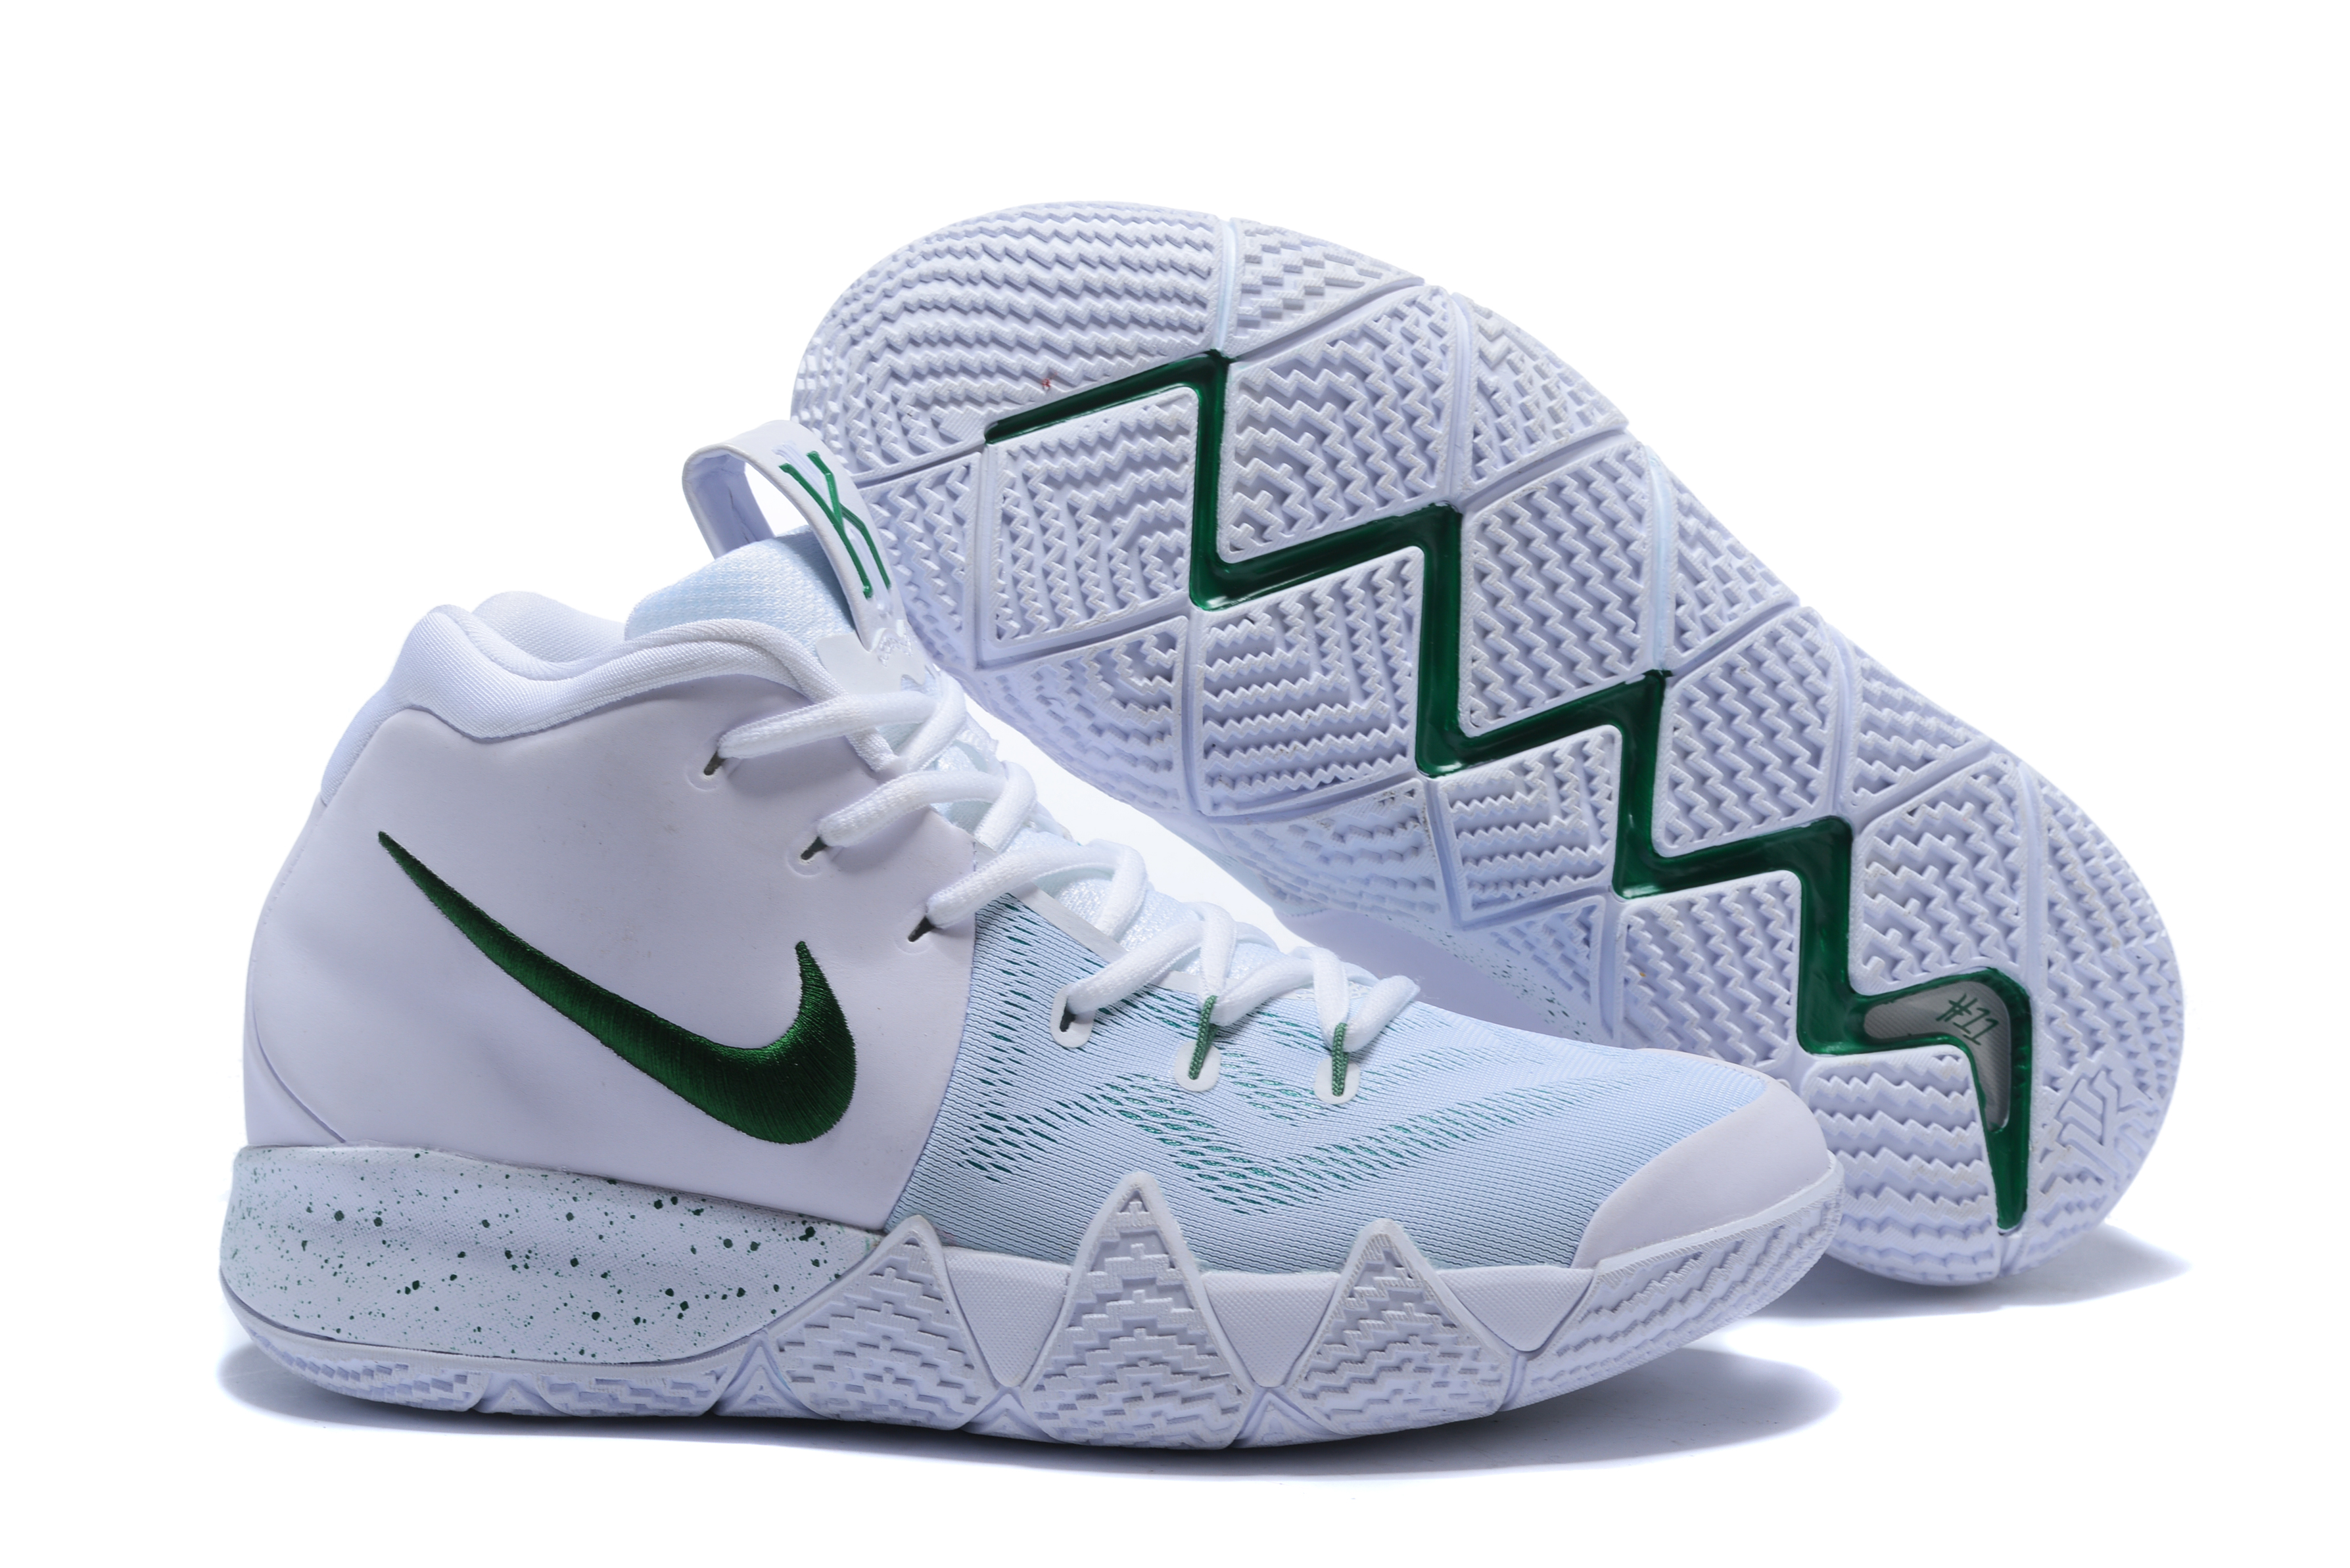 Nike Kyrie 4 White Dark Green Basketball Shoes - Click Image to Close